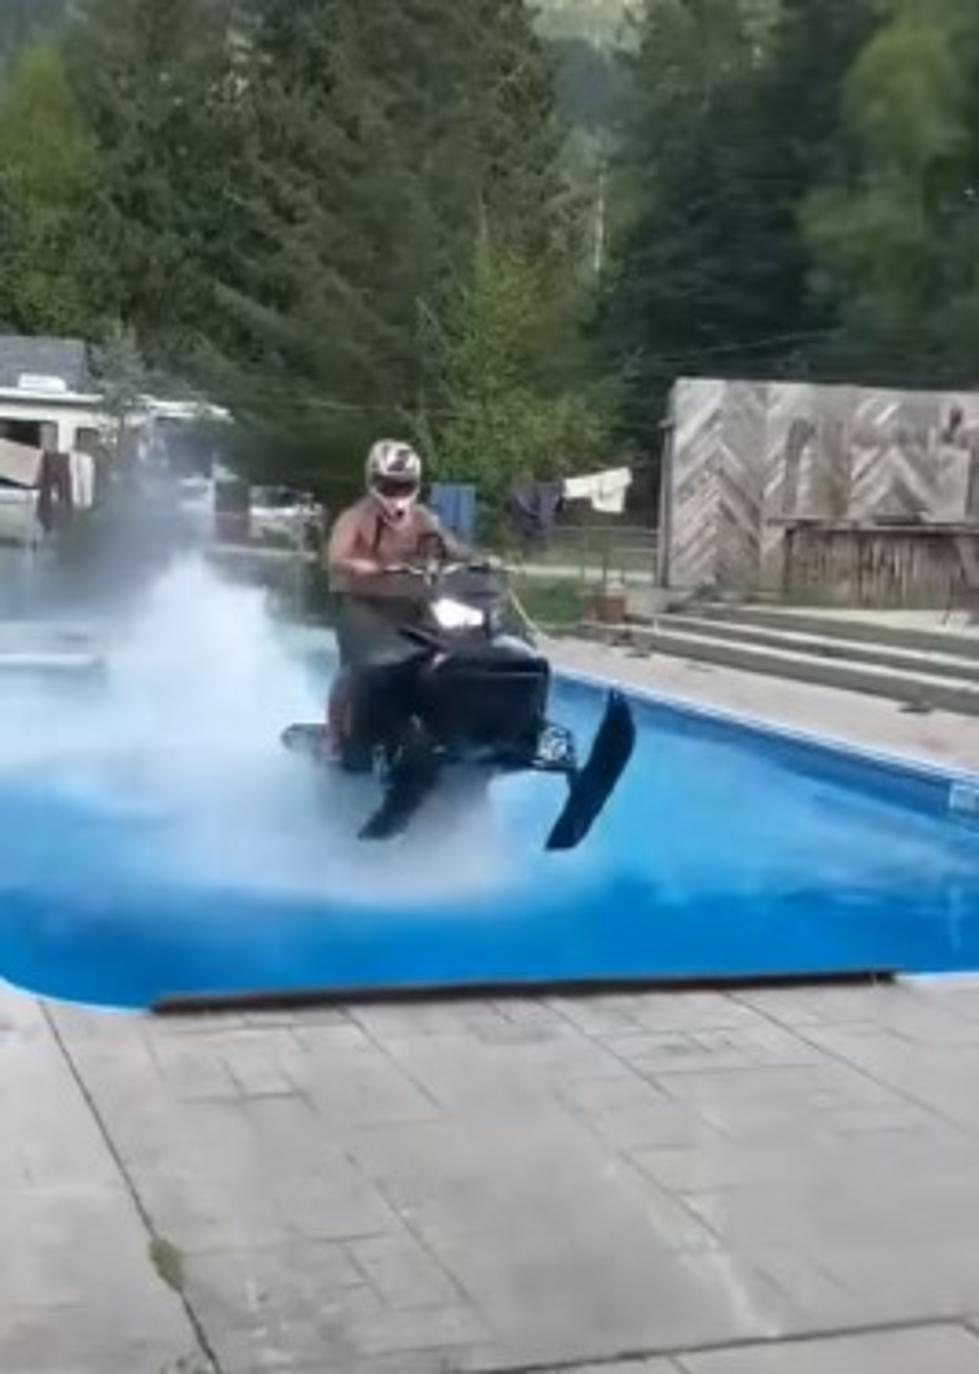 [VIDEO] Guy Rides Snowmobile Over Pool, Crashes